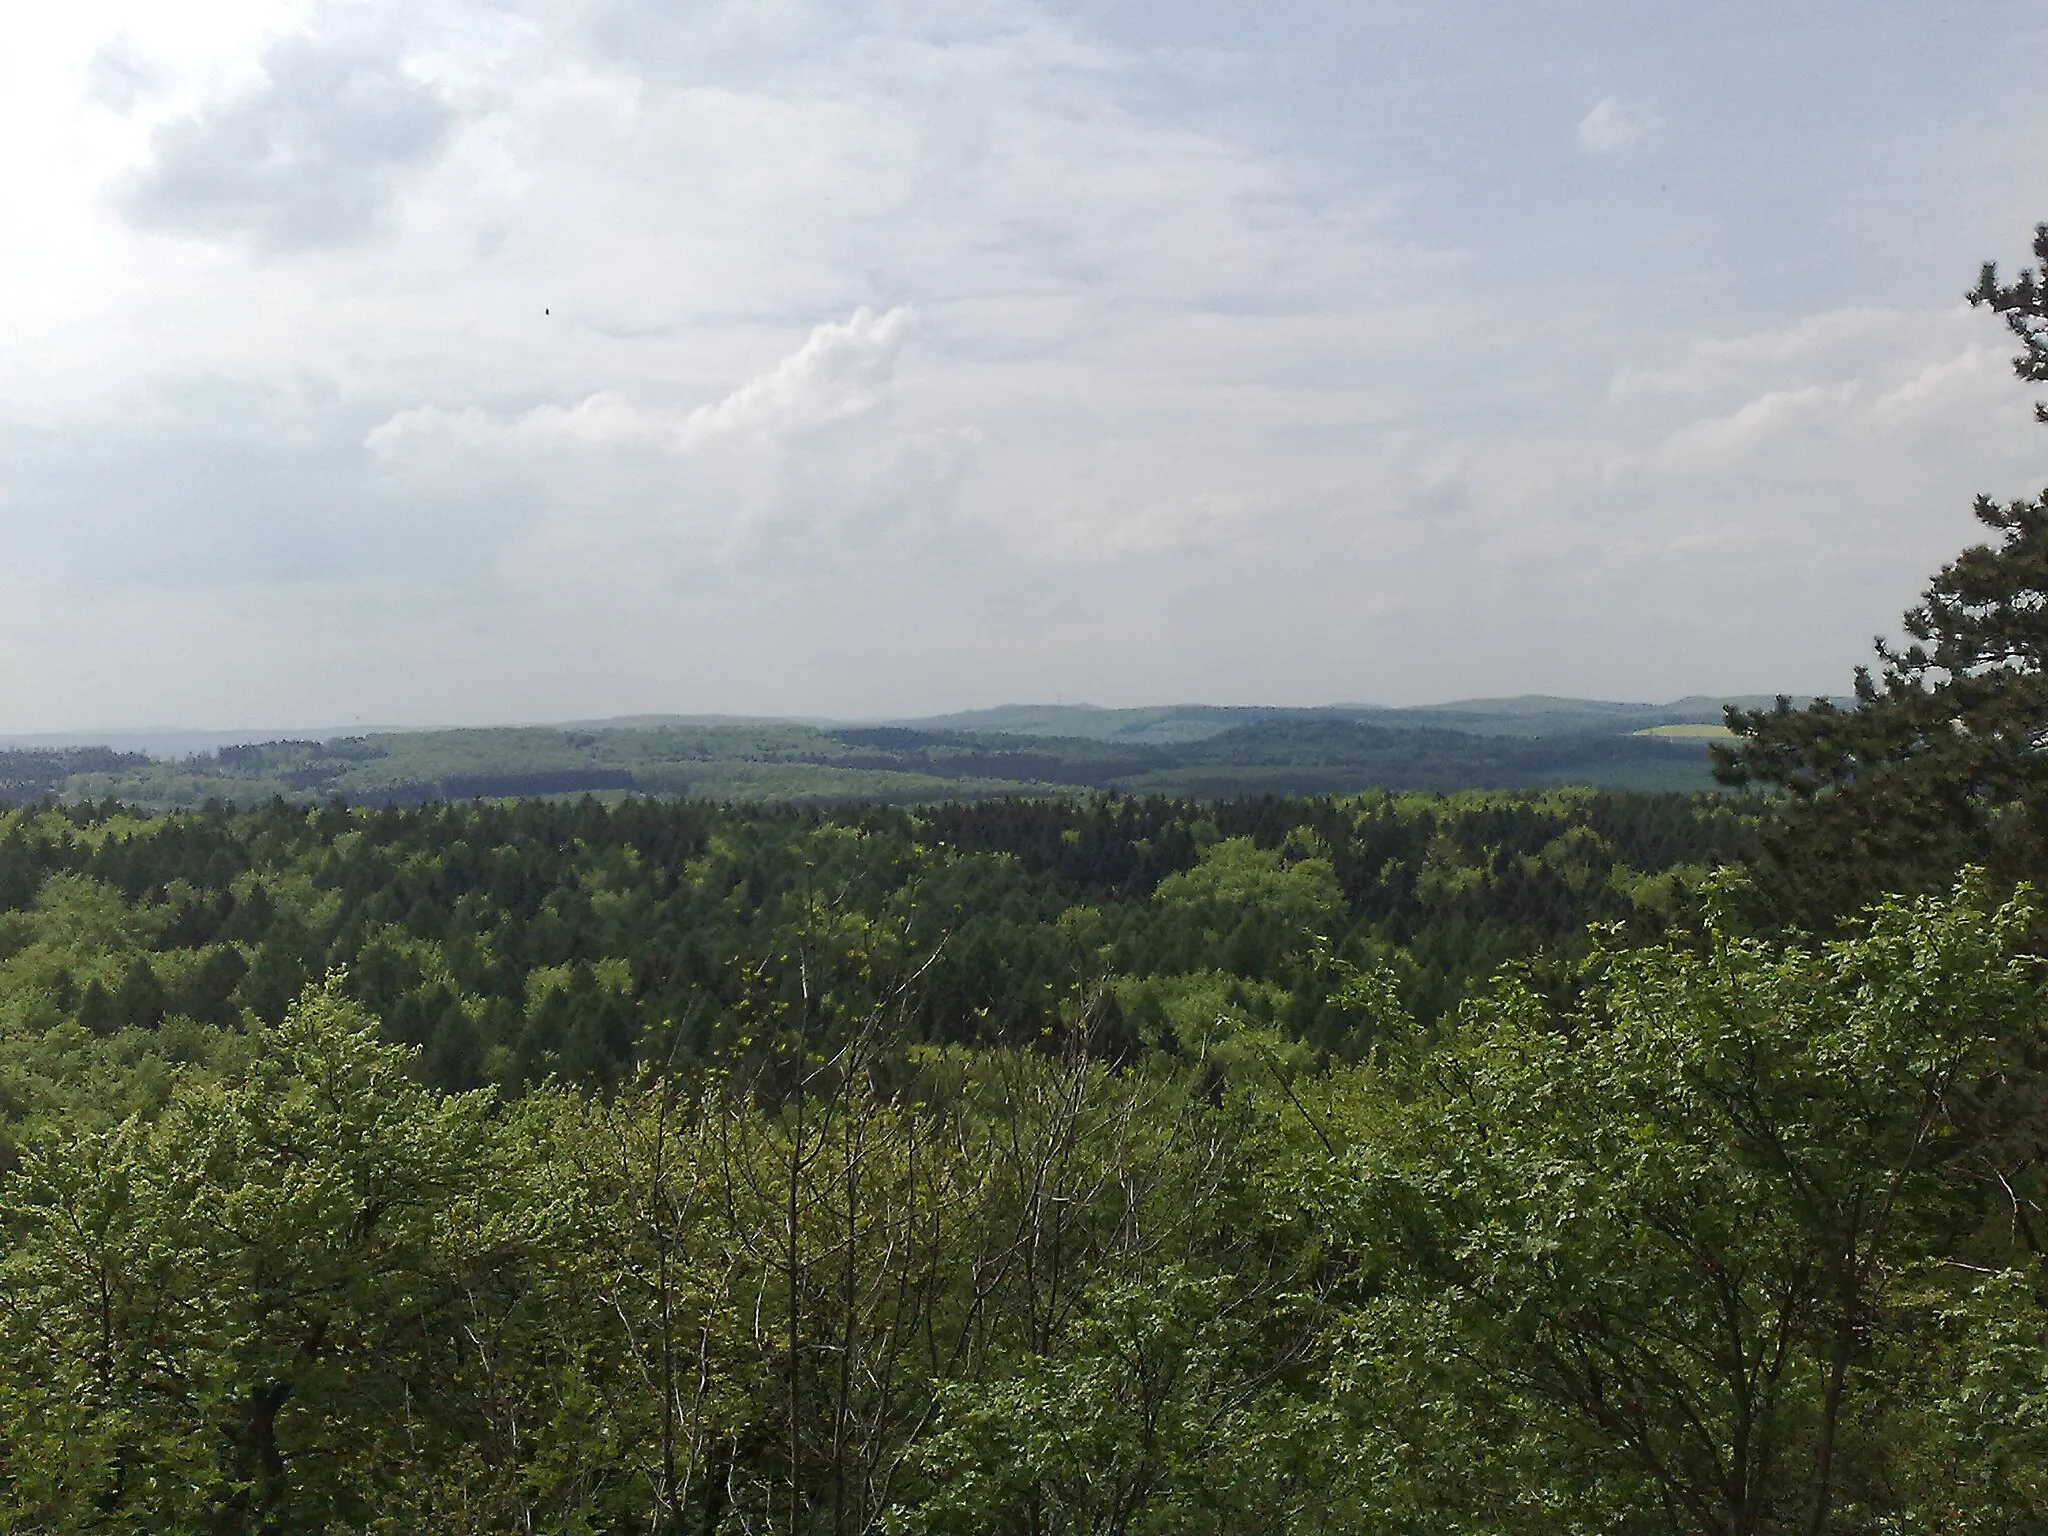 Photo showing: View from the mountain Nördlicher Jägerturmskopf to the west; Heere, Lower Saxony, Germany.